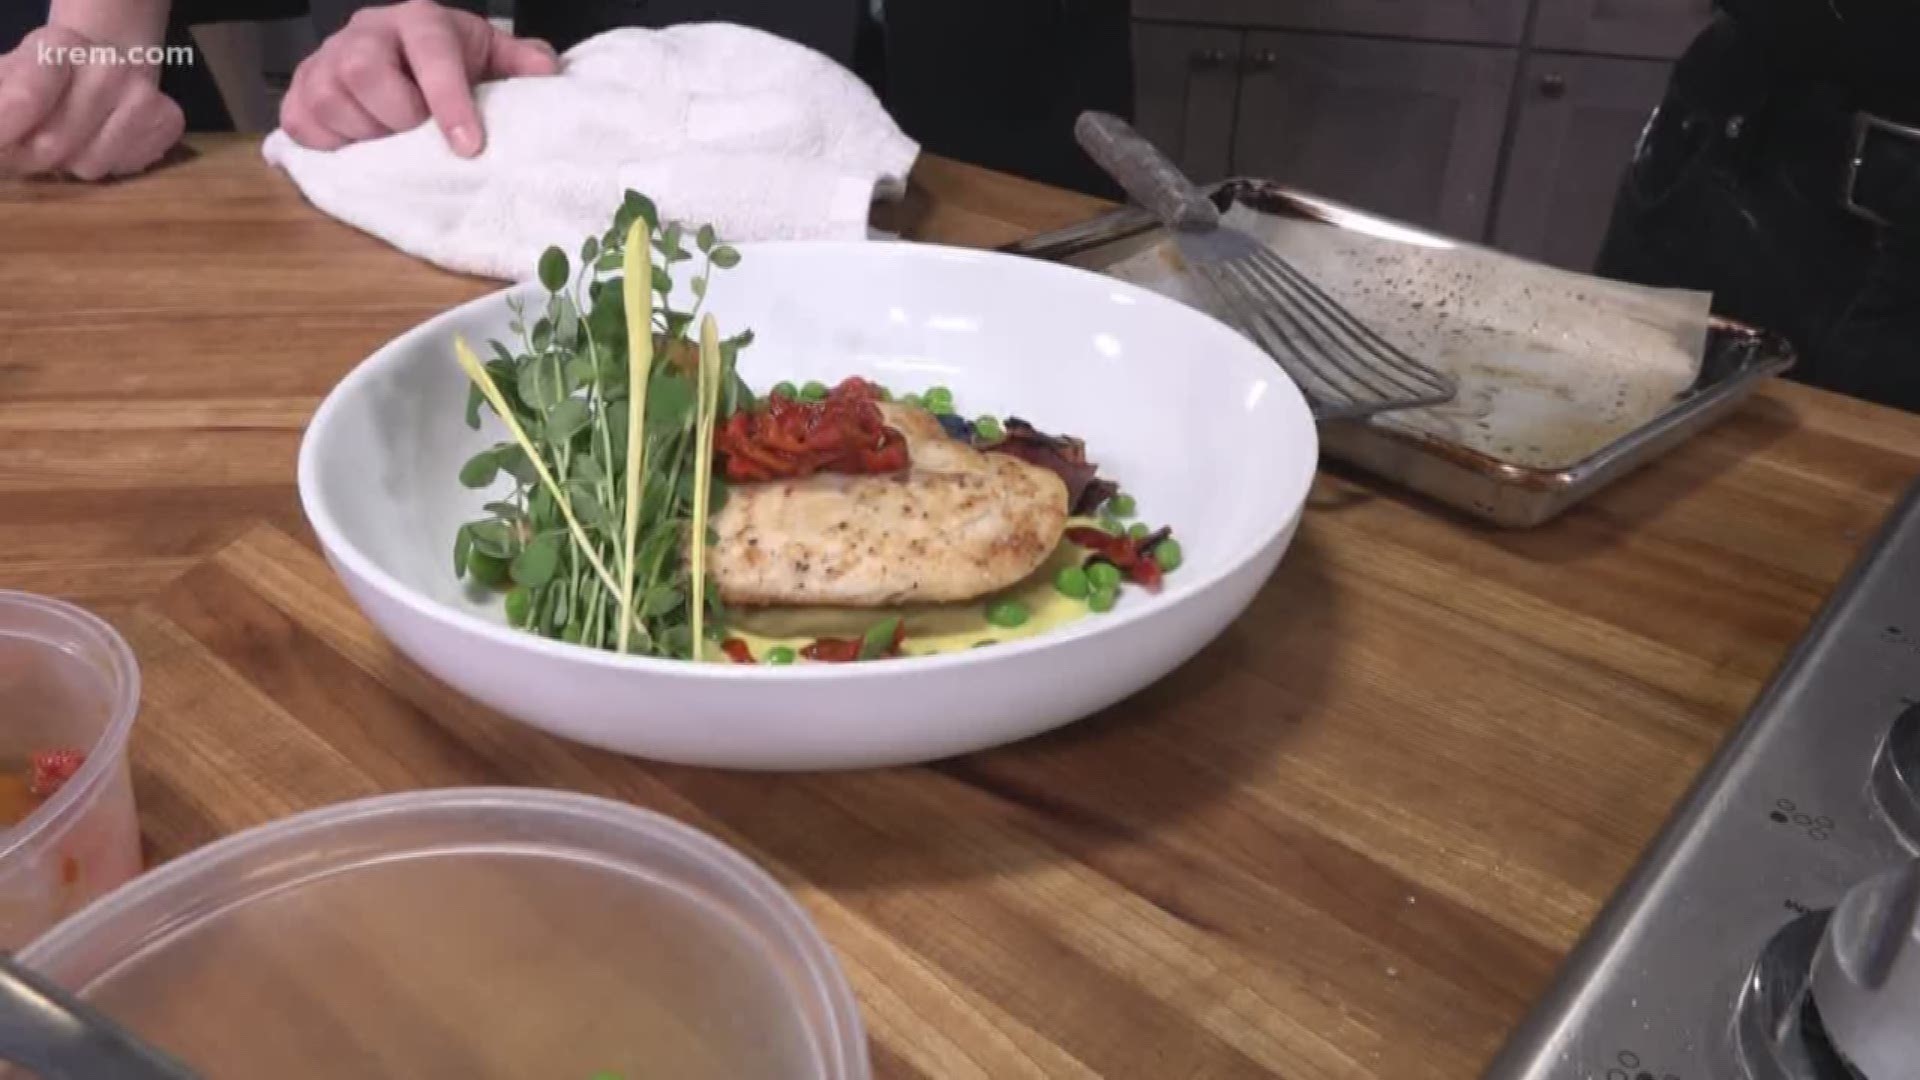 KREM's Joshua Robinson and Danamarie McNicholl check in with Chef Michael Wiley to preview the Restaurant Week menu at Wiley's Downton Bistro.